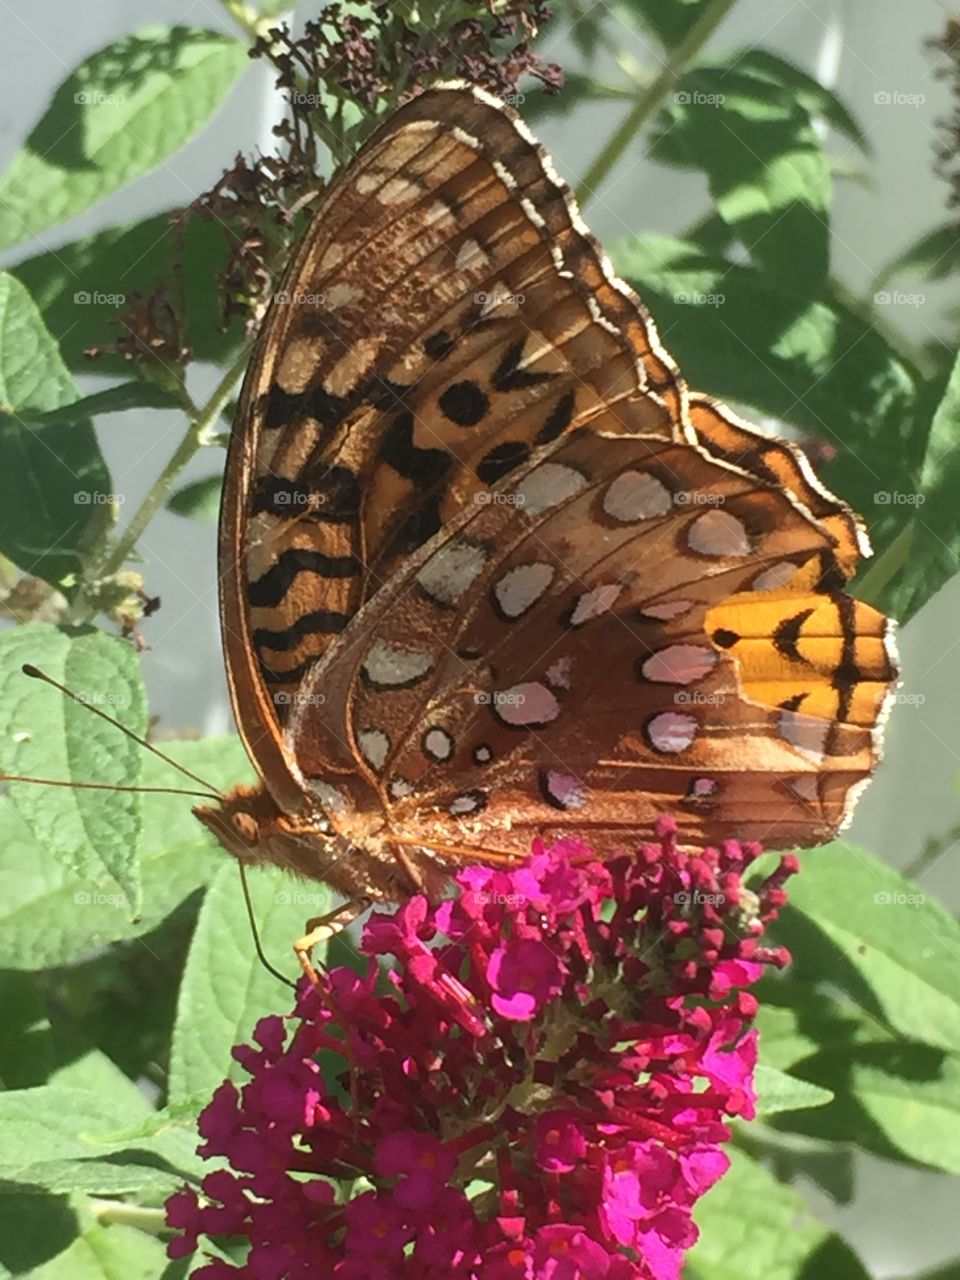 Painted Lady Butterfly 